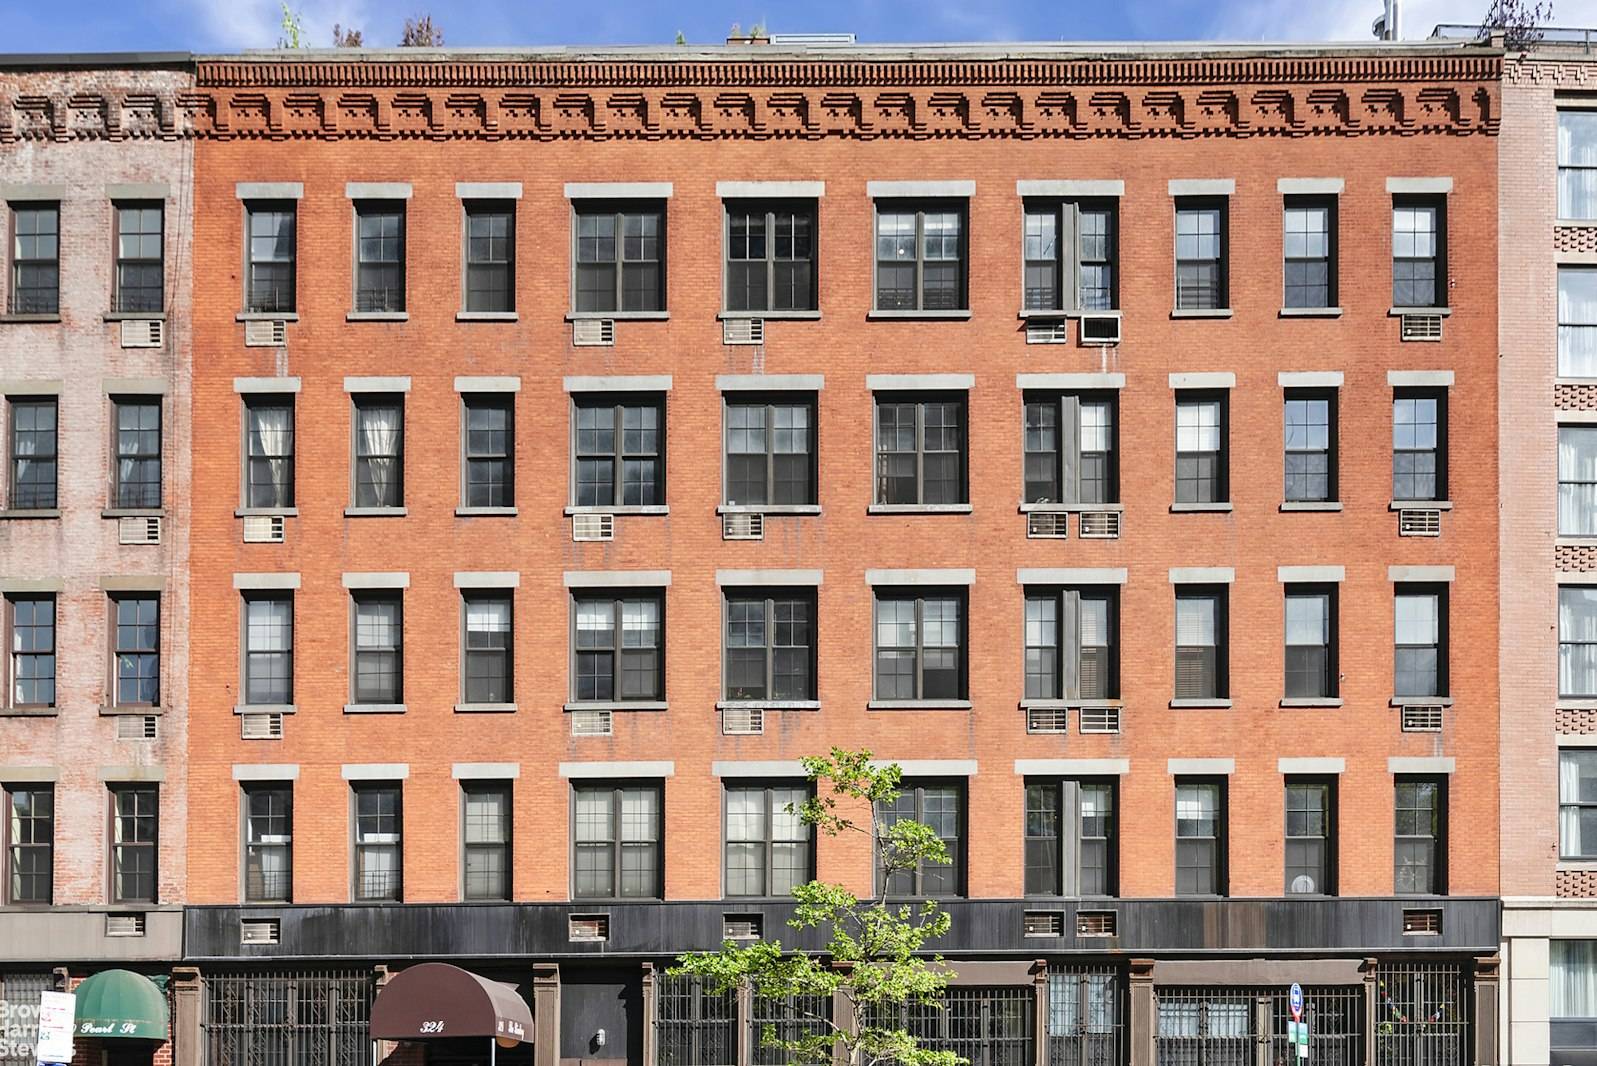 Welcome to a truly exceptional living experience in the heart of the historic South Street Seaport at The Bindery, a meticulously managed pre war boutique condo building.